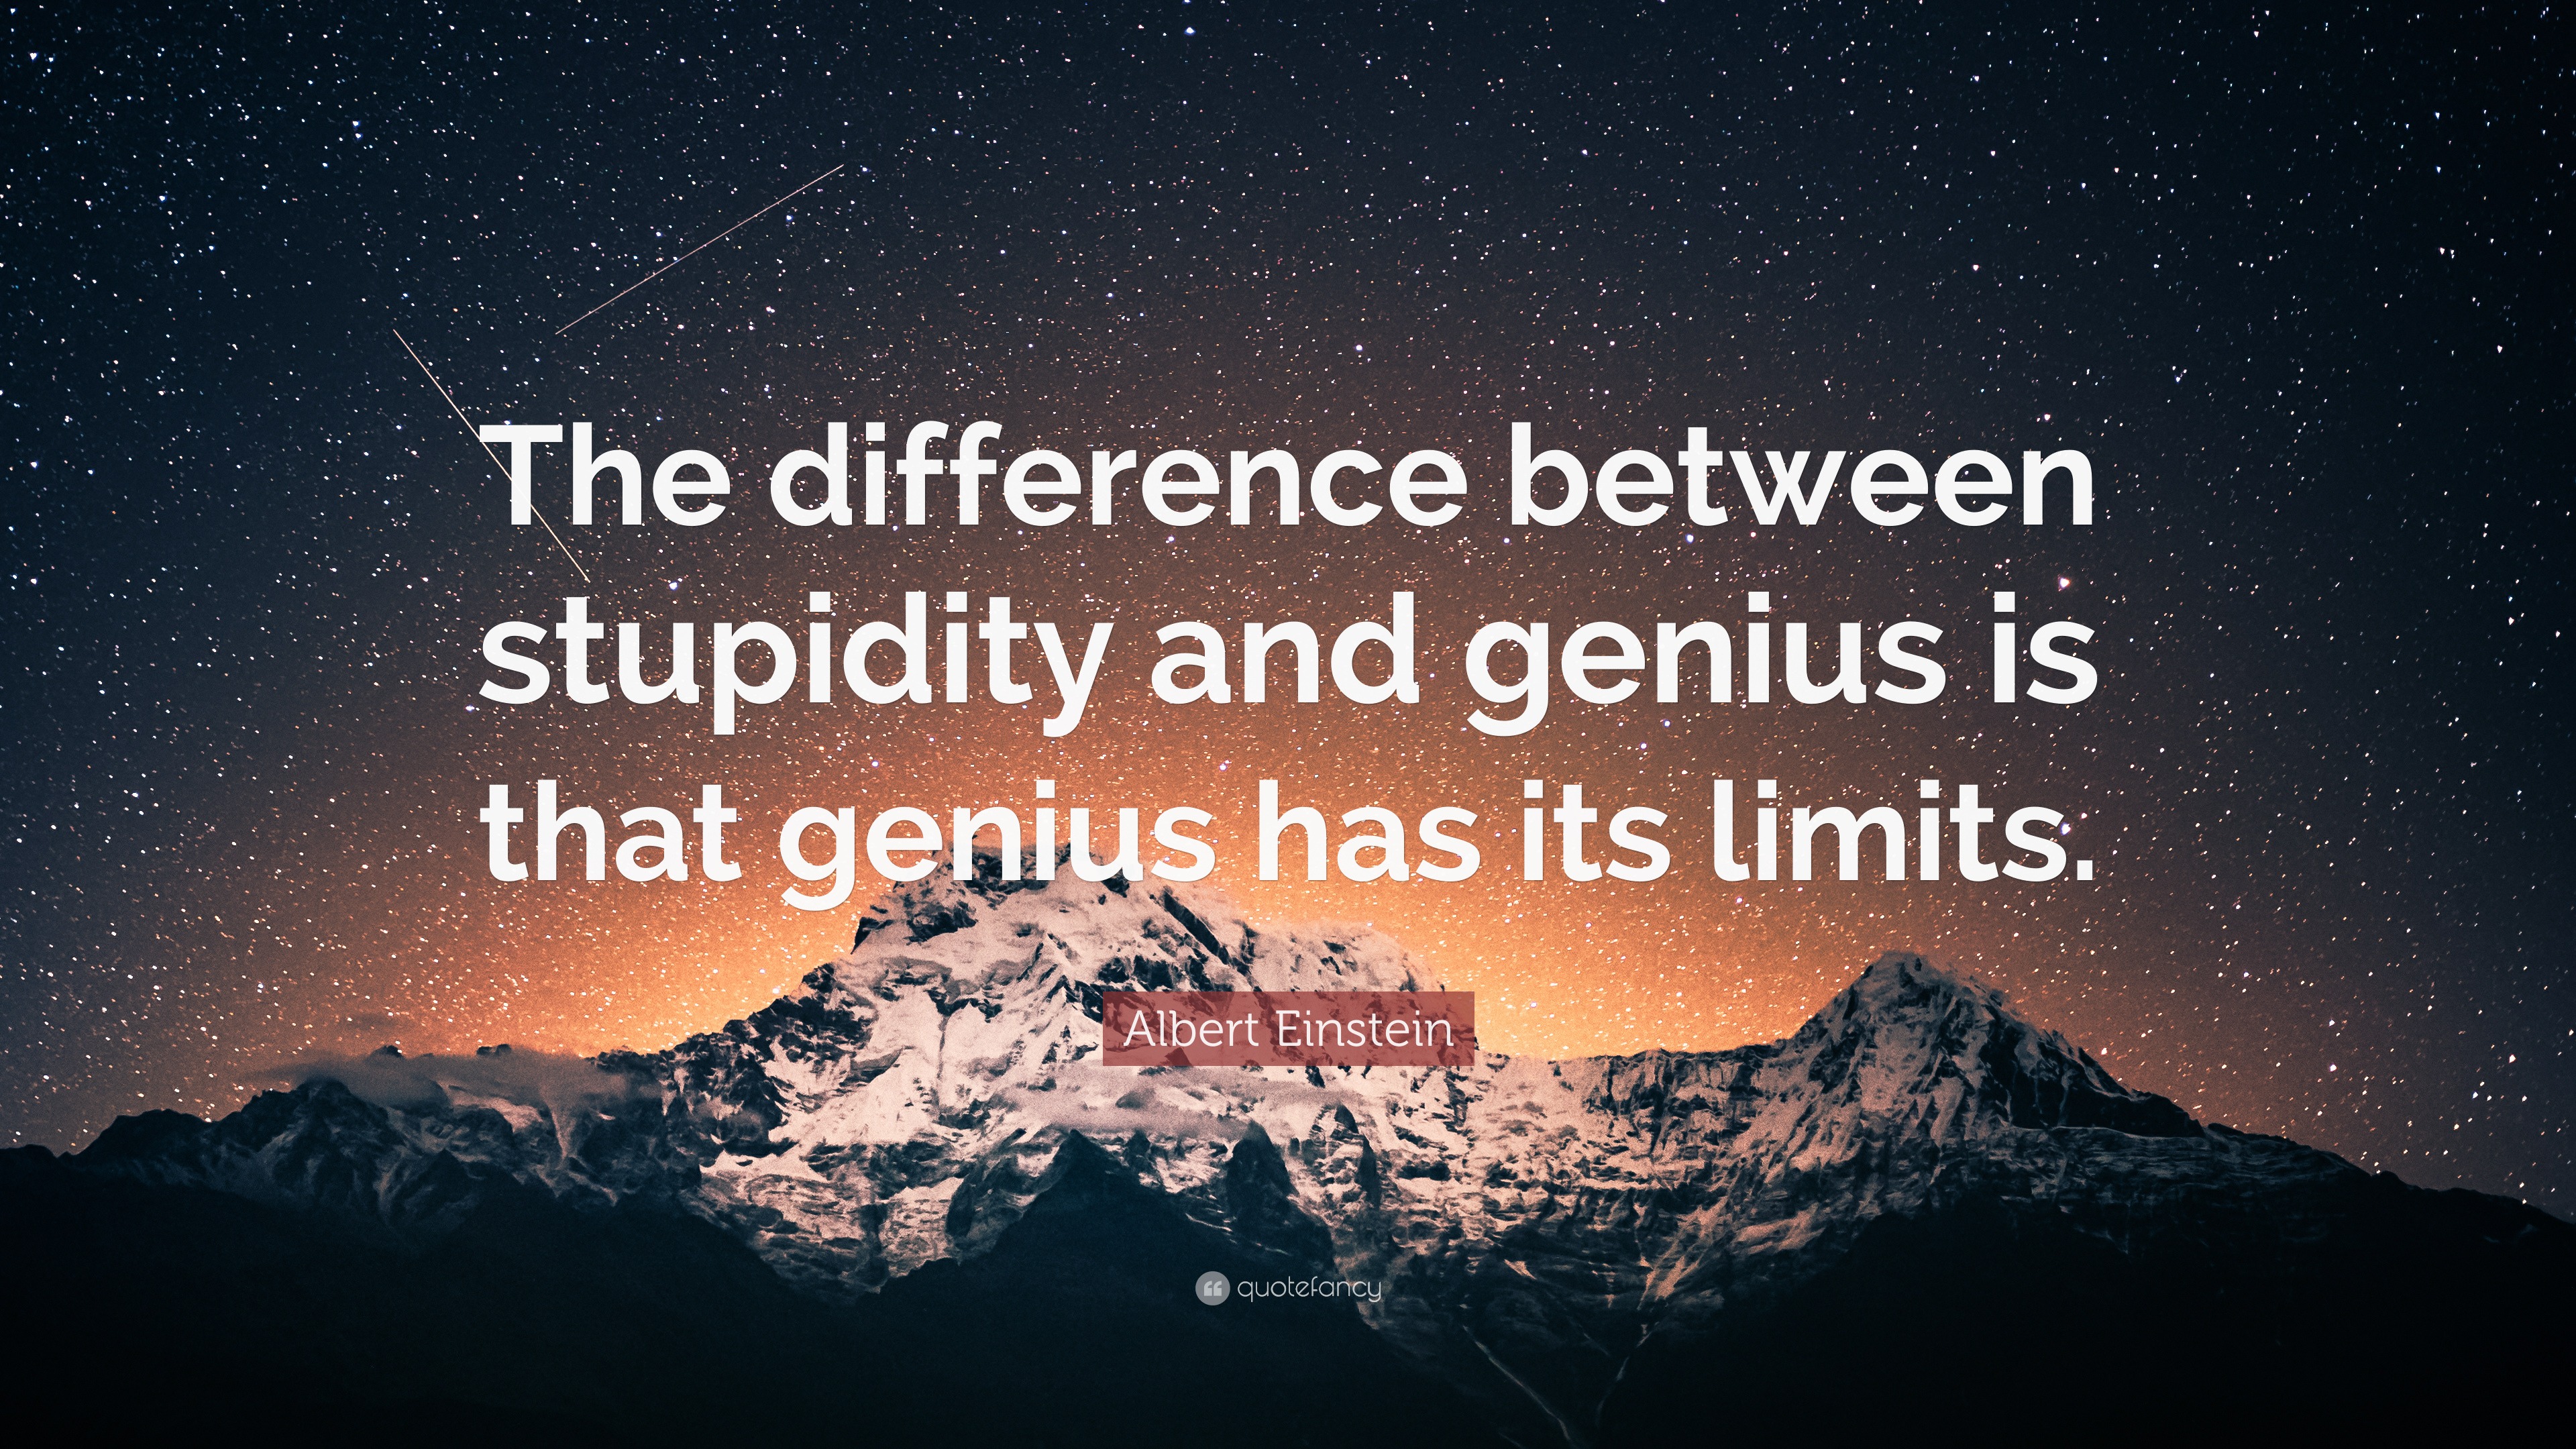 Albert Einstein Quote: "The difference between stupidity and genius is that genius has its ...